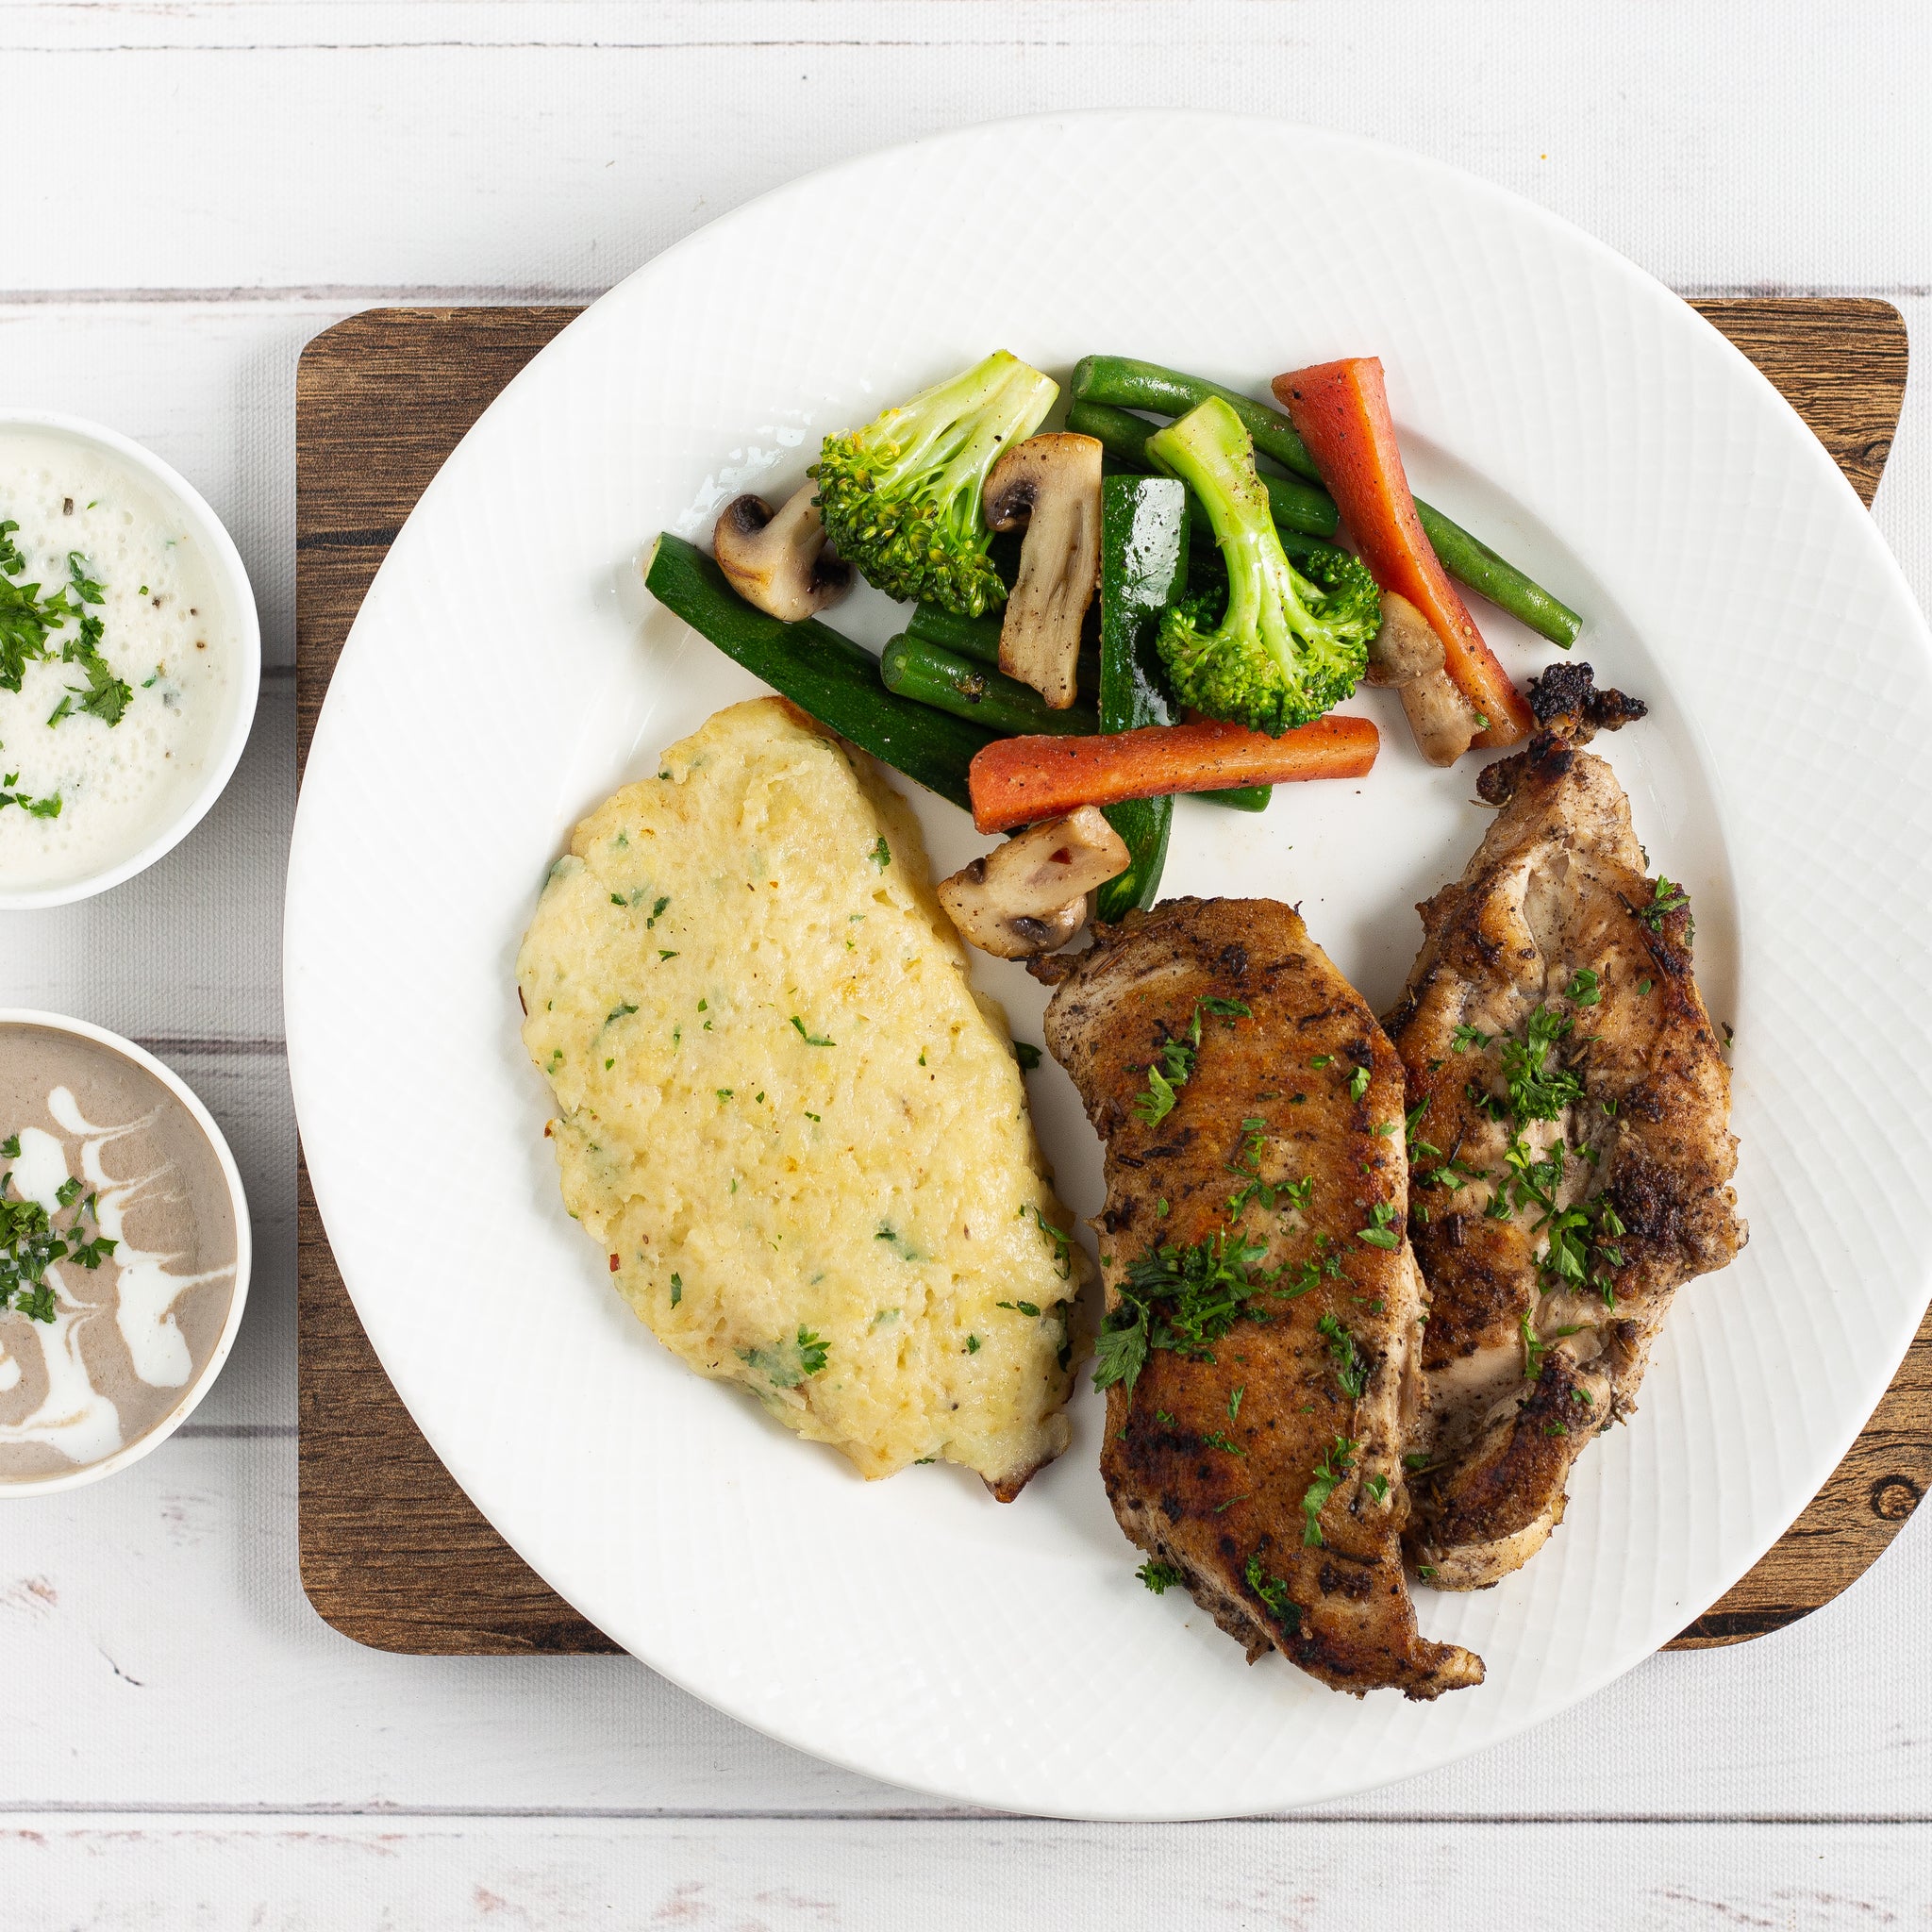 Chicken Steak with Sautéed Veggies and Mashed Potatoes Images